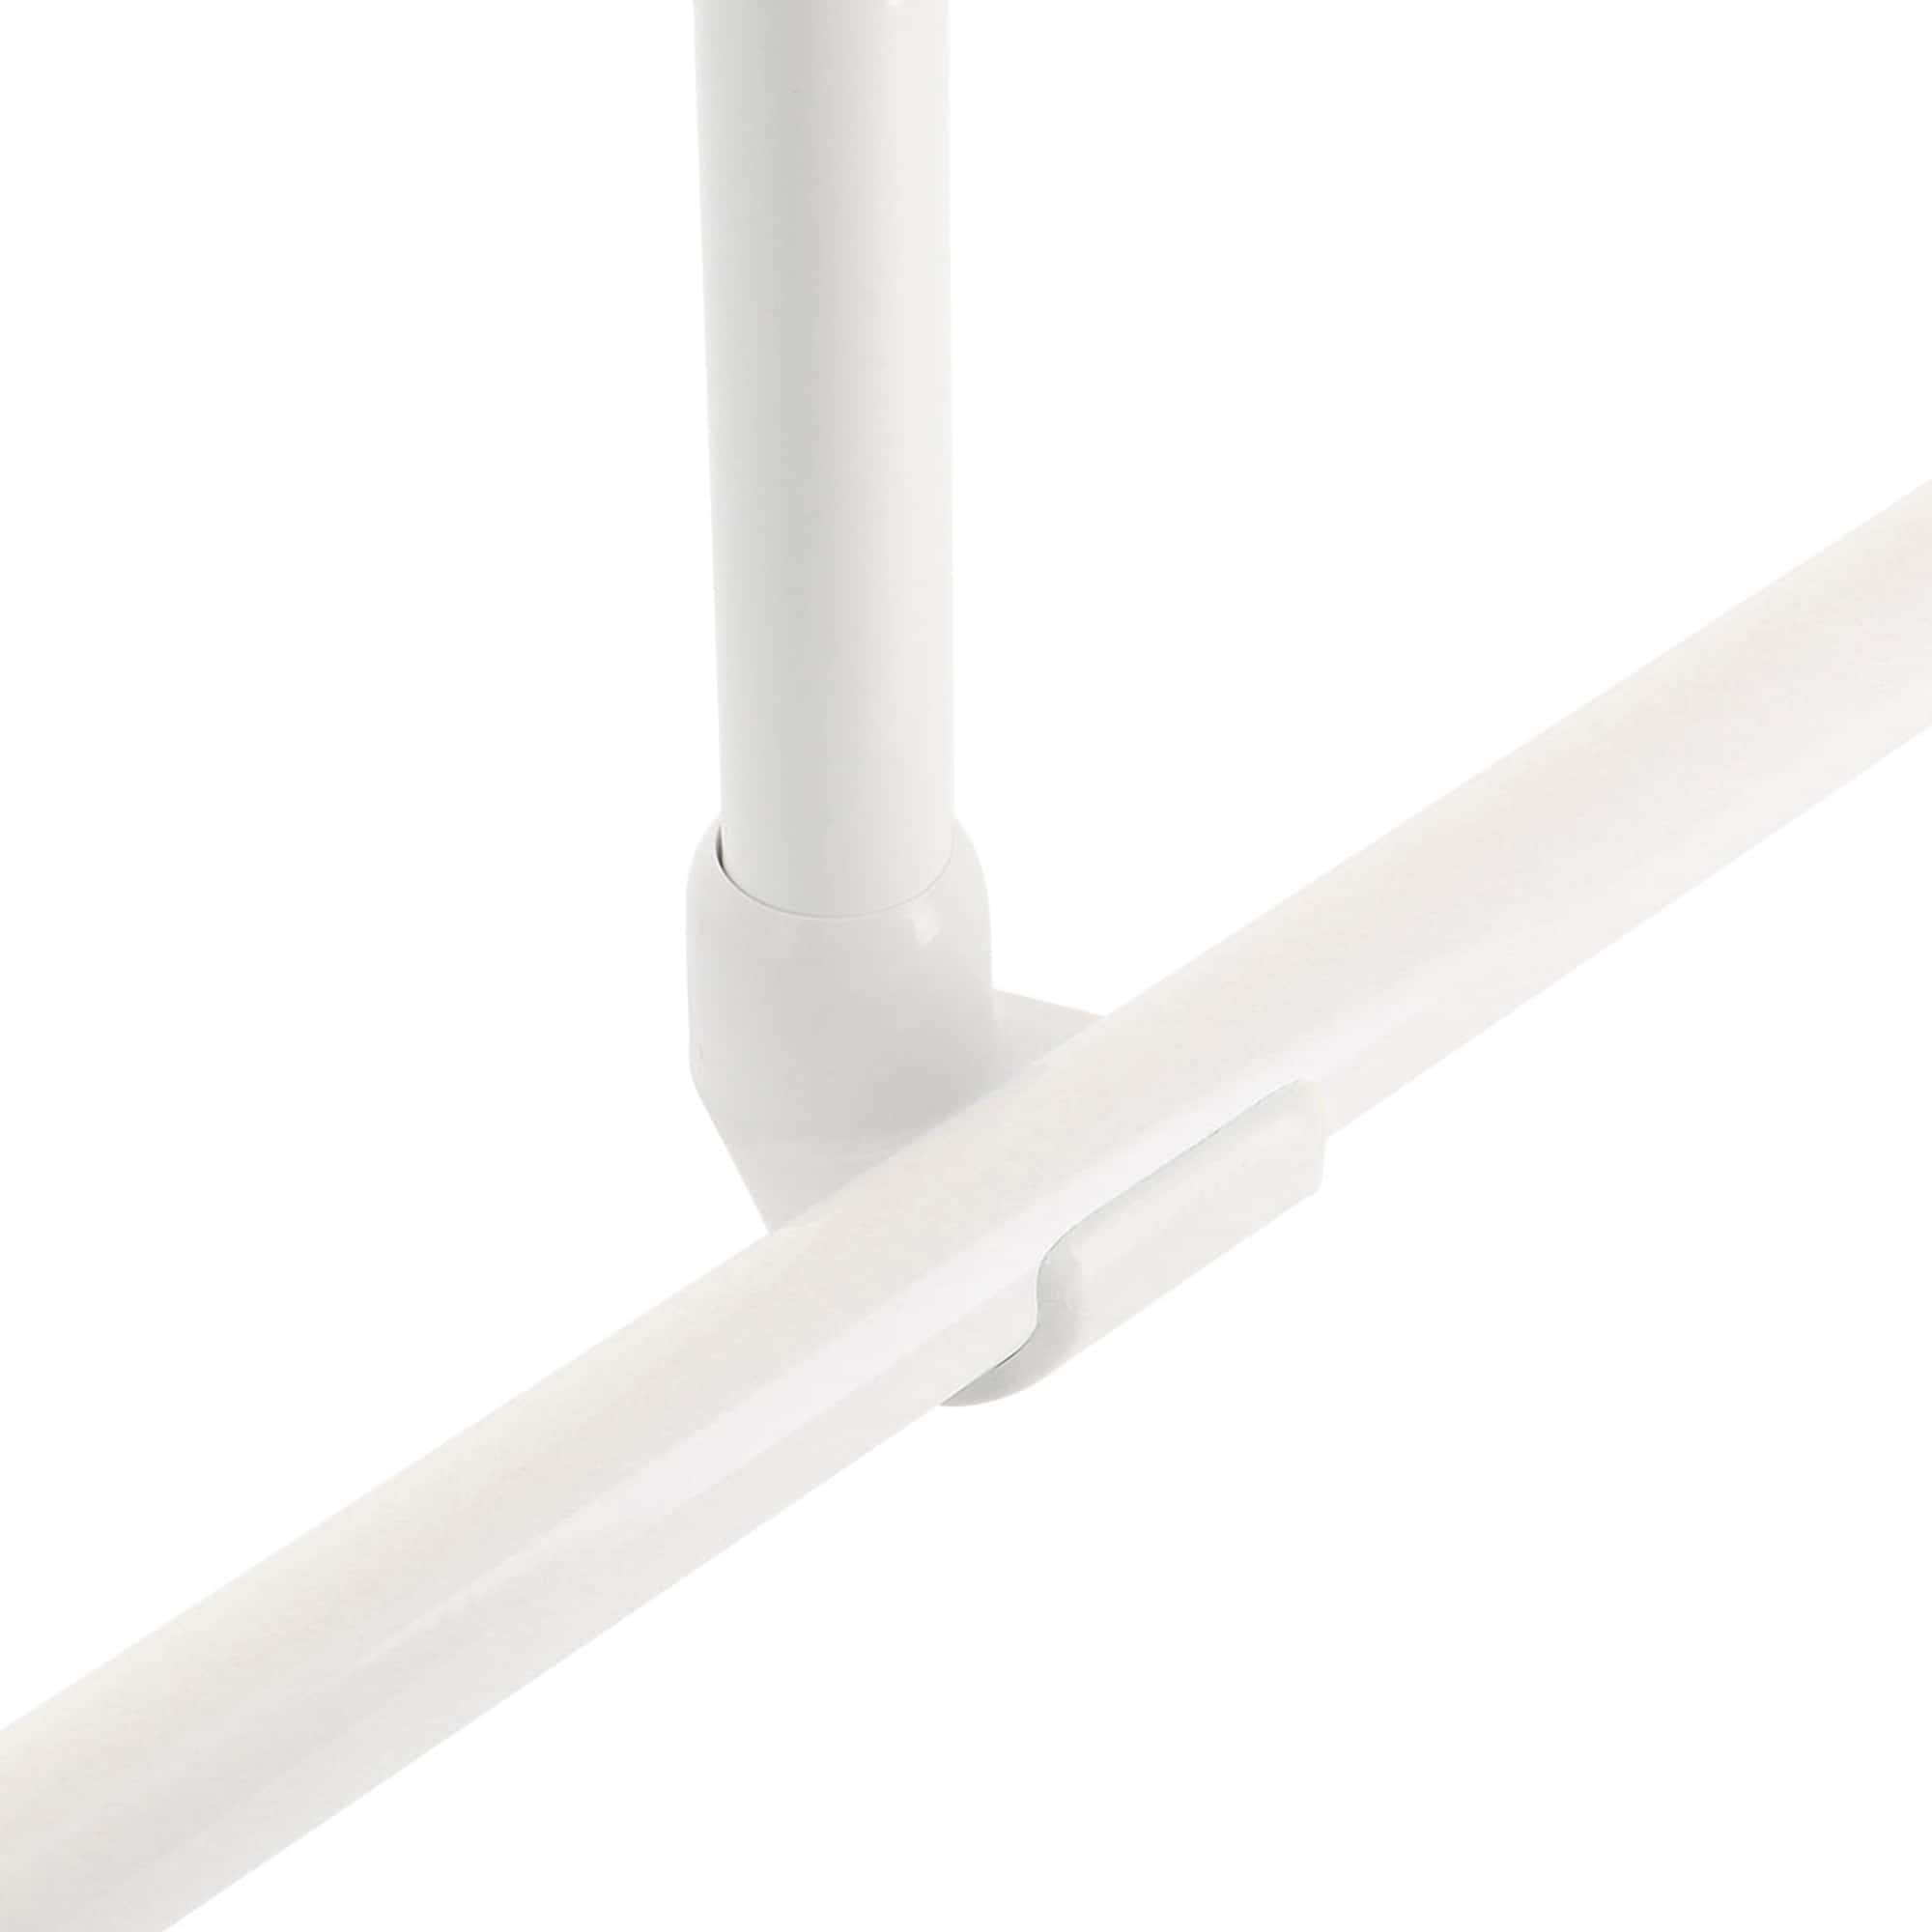 Detail of the ceiling support rod's clip attachment to a shower rail, highlighting the secure fit (2)